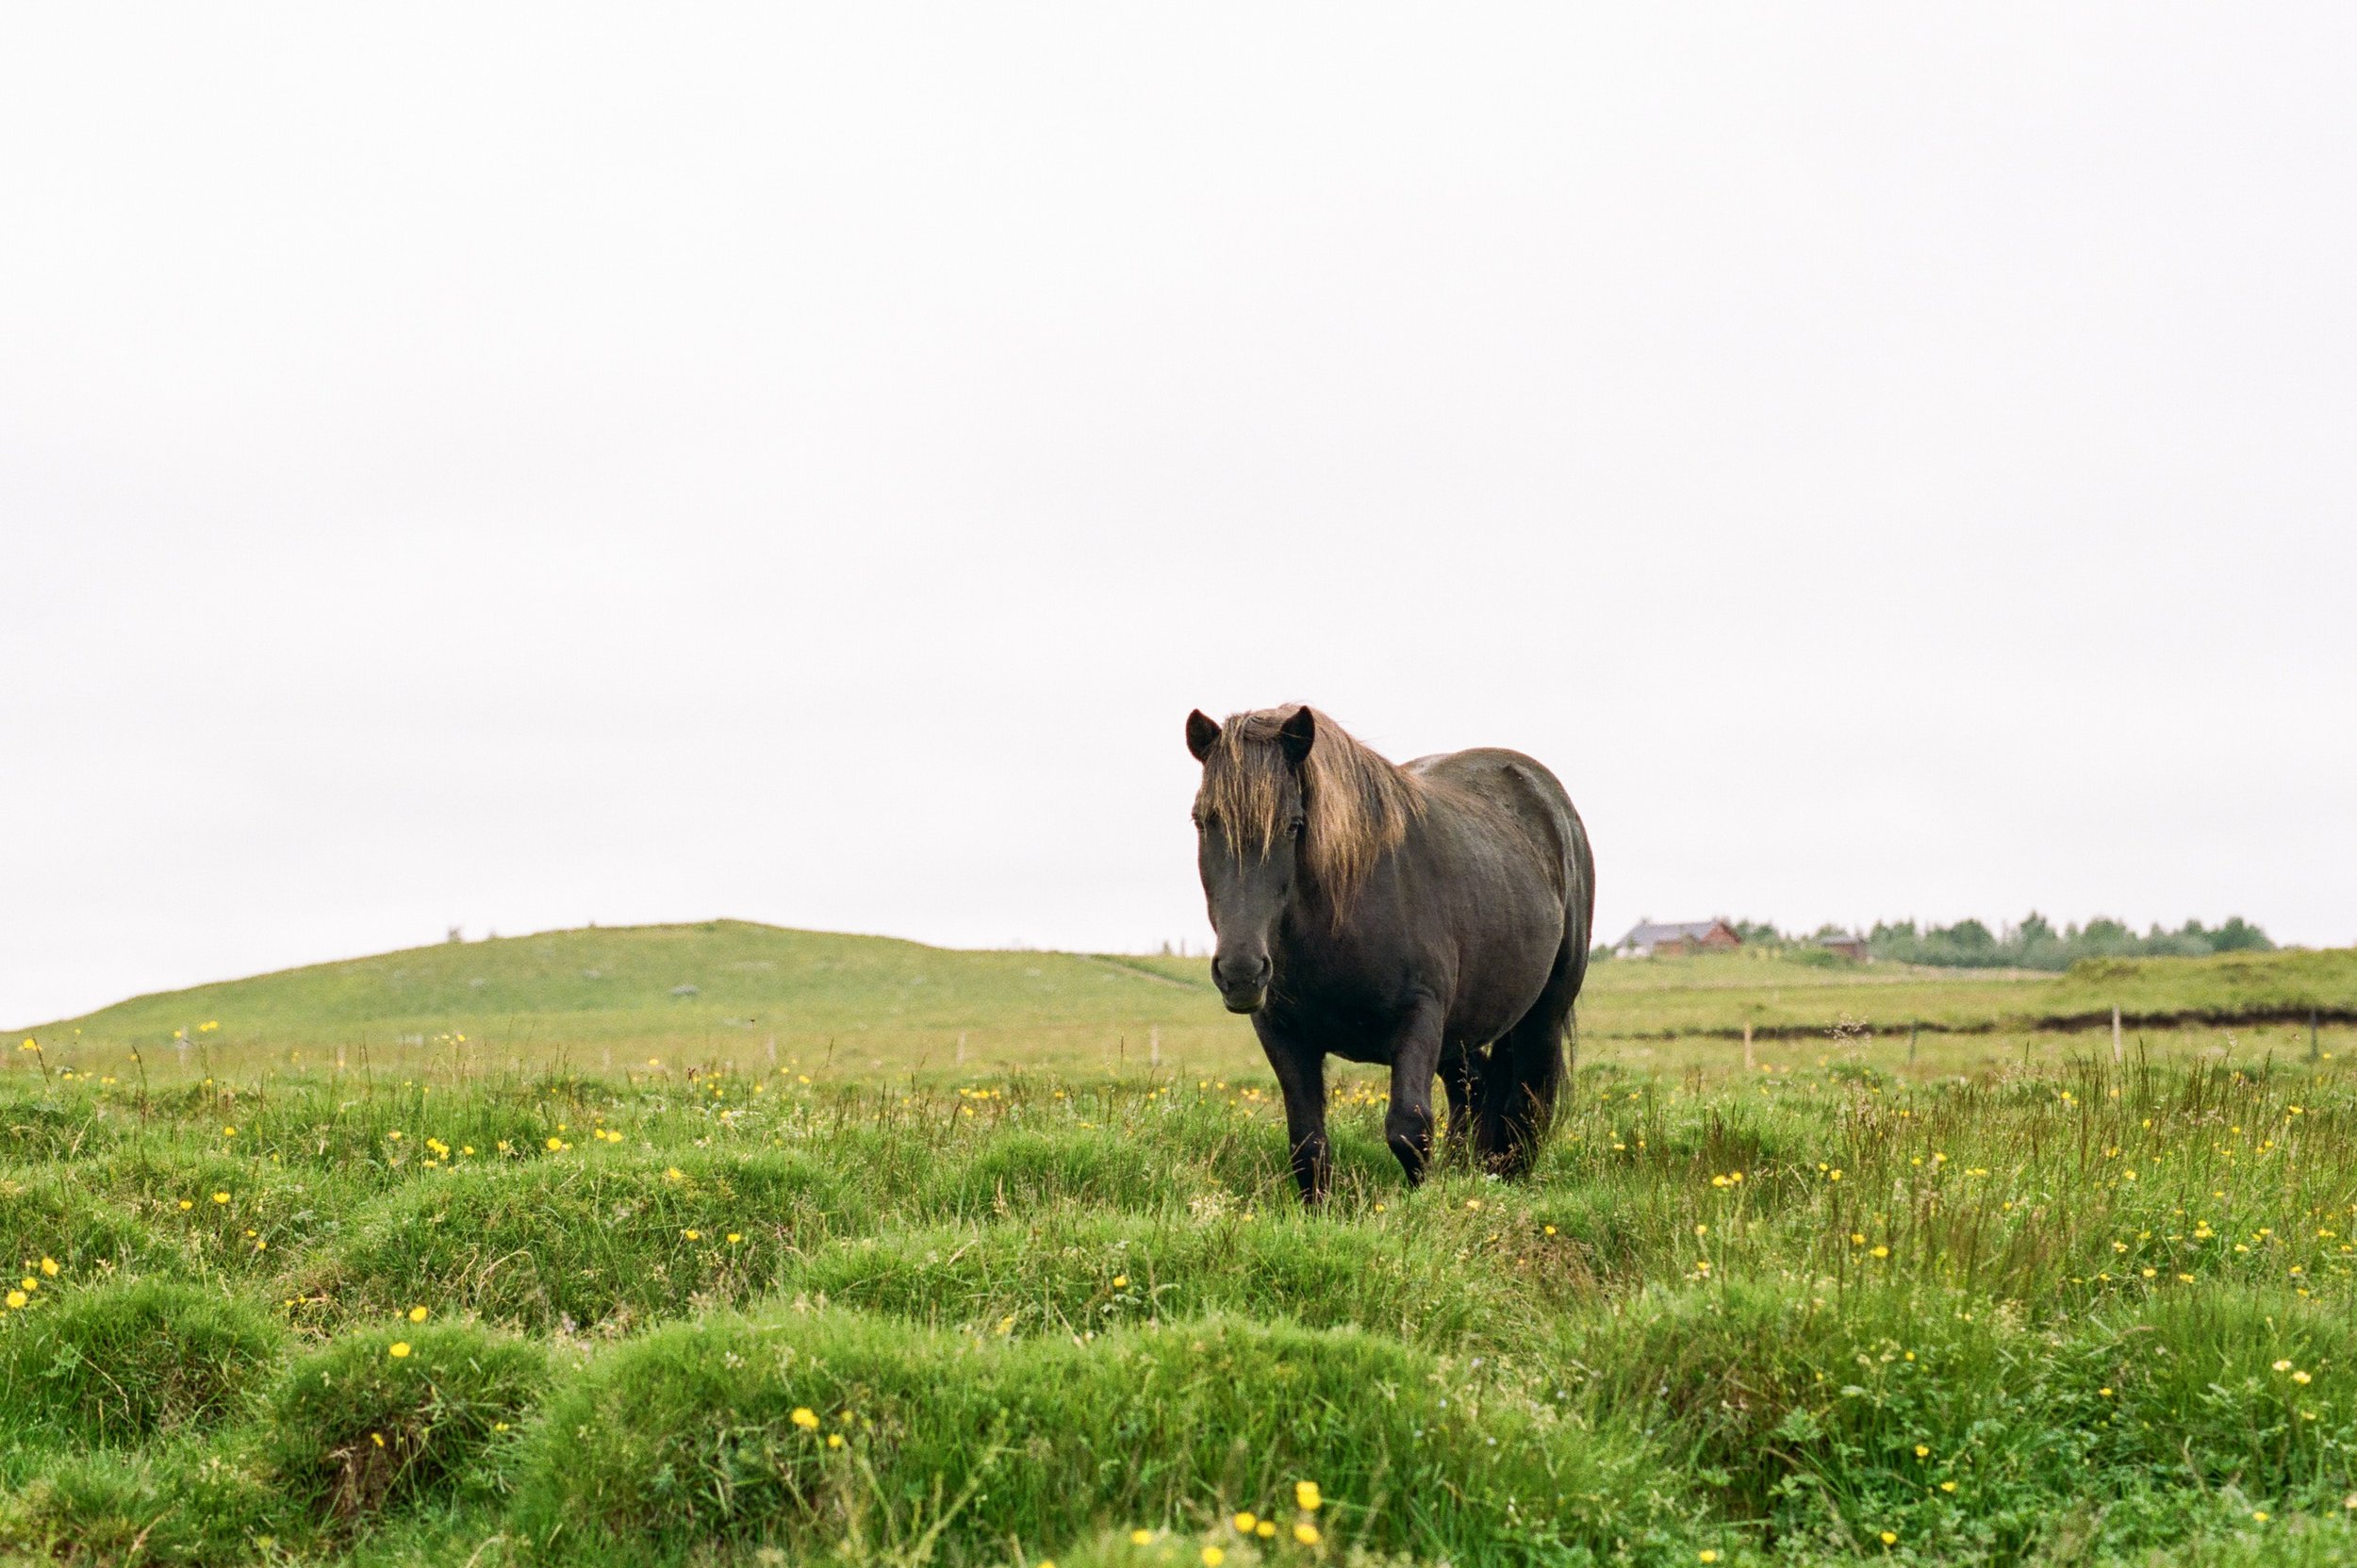 Horses in Iceland by Amilia James now on Cottage Hill13.jpg